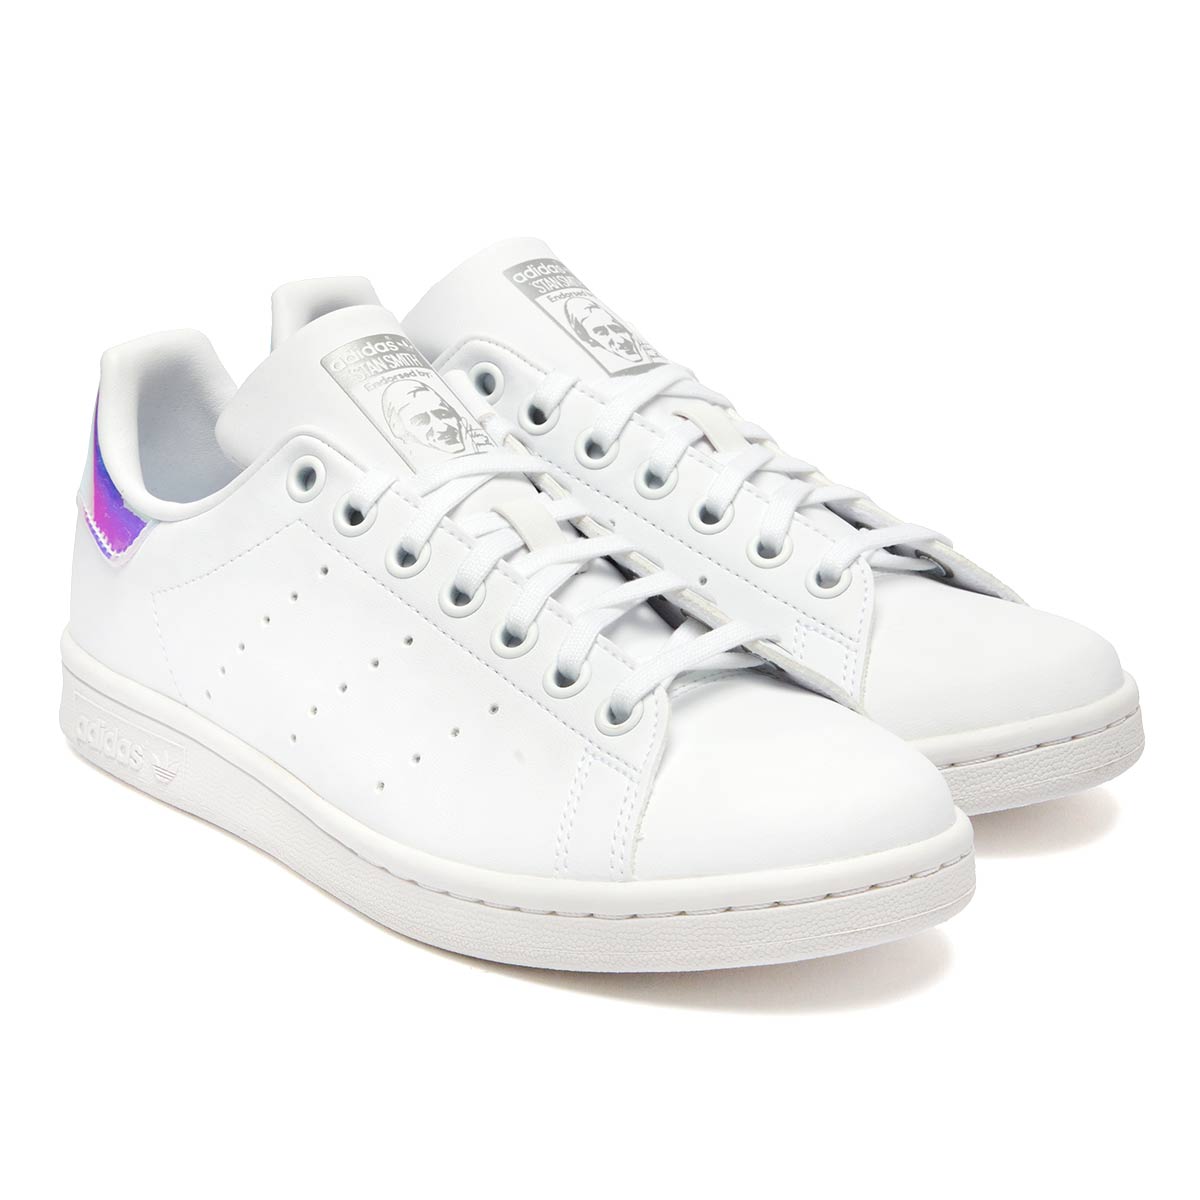 PROOZY J Smith Stan adidas – Shoes Youth